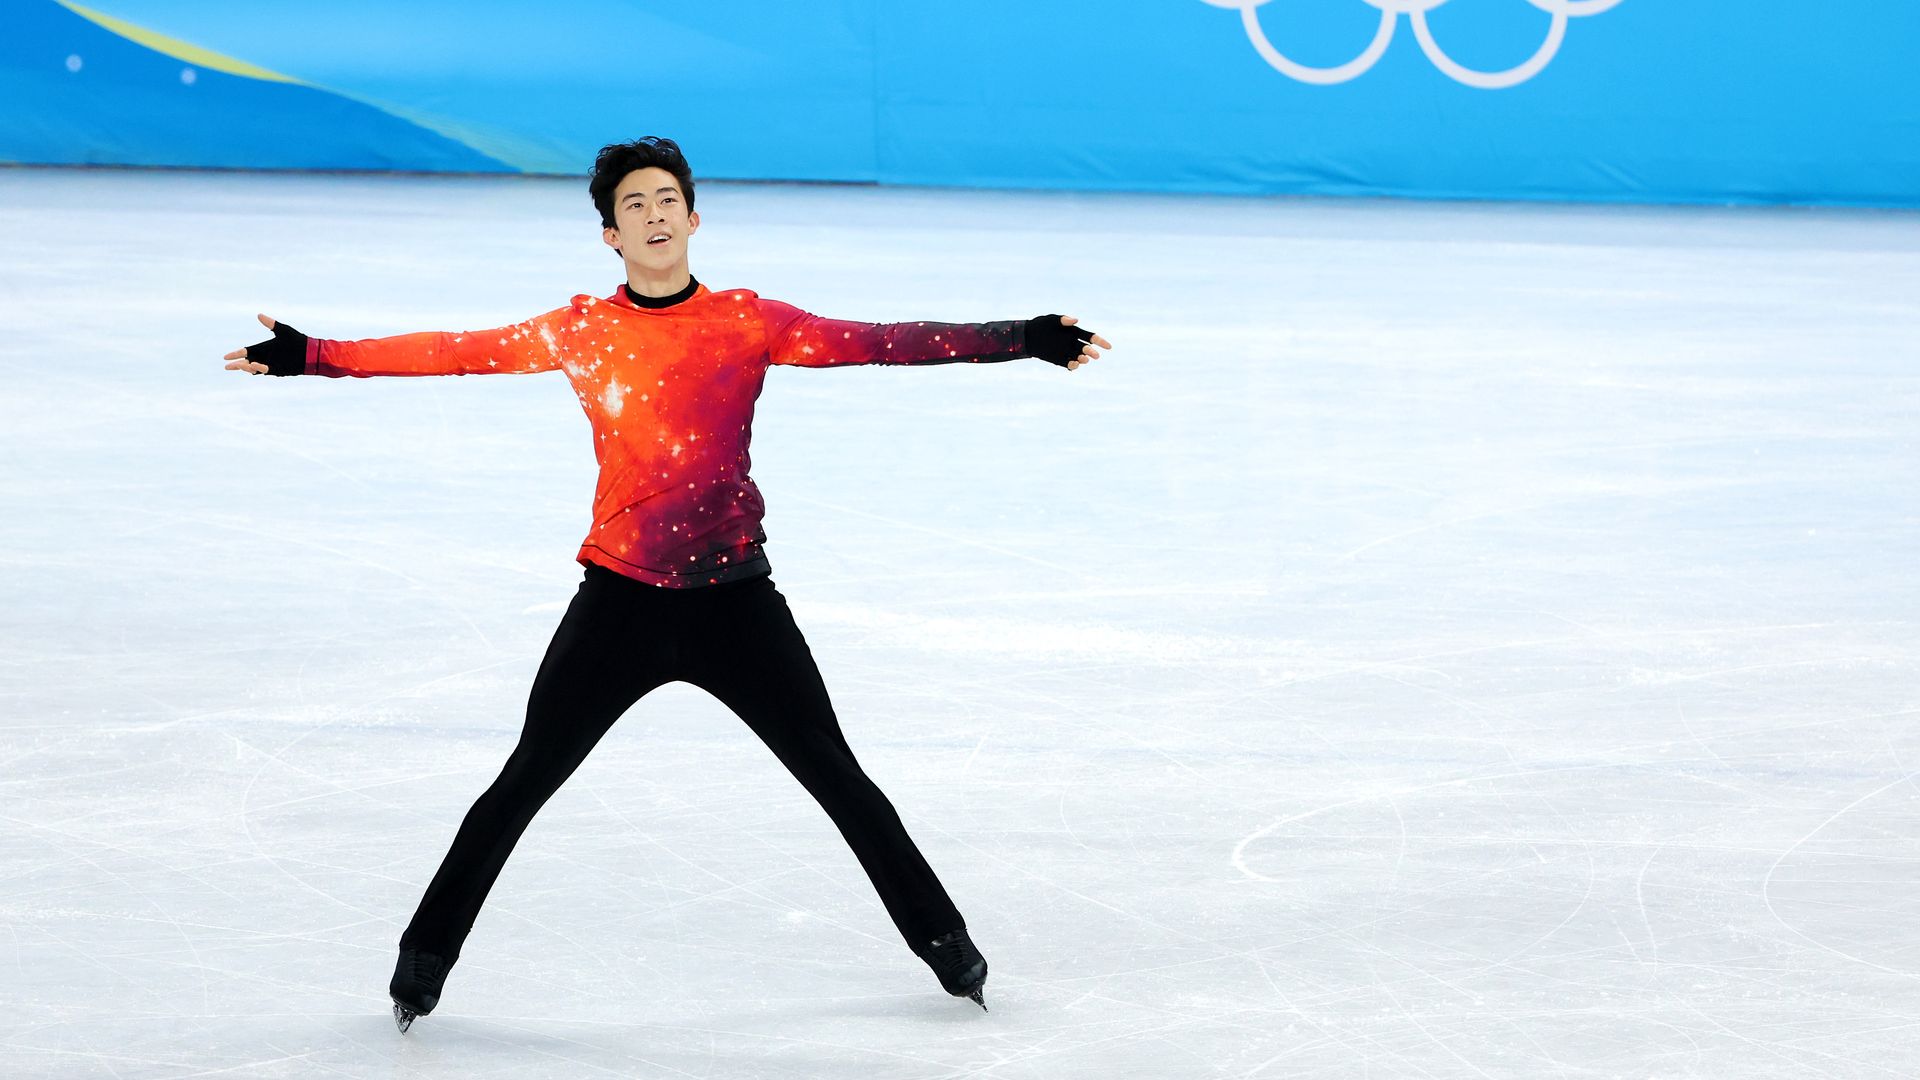 Nathan Chen of Team United States reacts during the Men Single Skating Free Skating on day six of the Winter Olympic Games at Capital Indoor Stadium on February 10, 2022 in Beijing, China